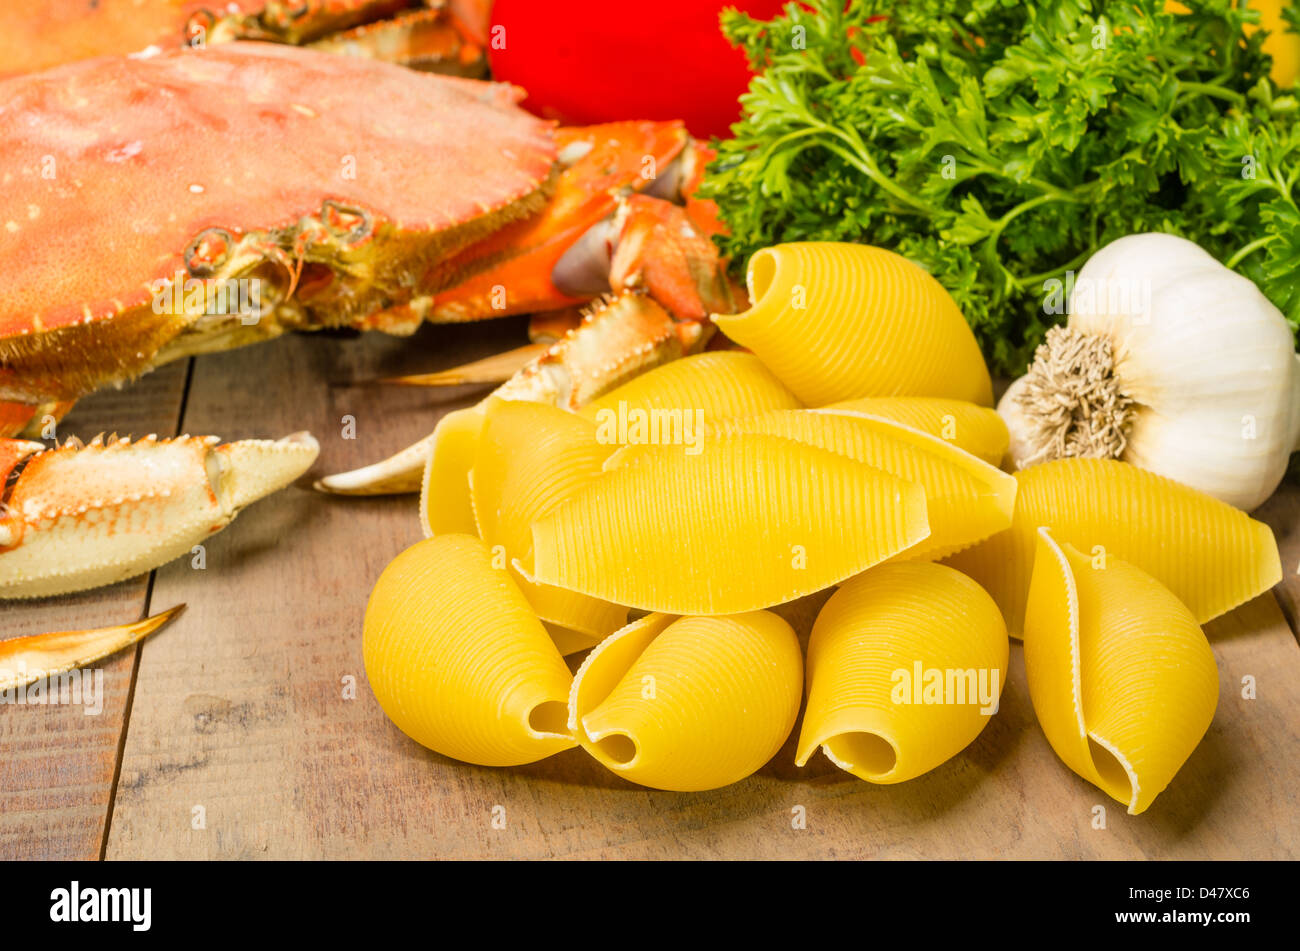 Ingredients for making Dungeness Crab Pasta with garlic and parsley Stock Photo